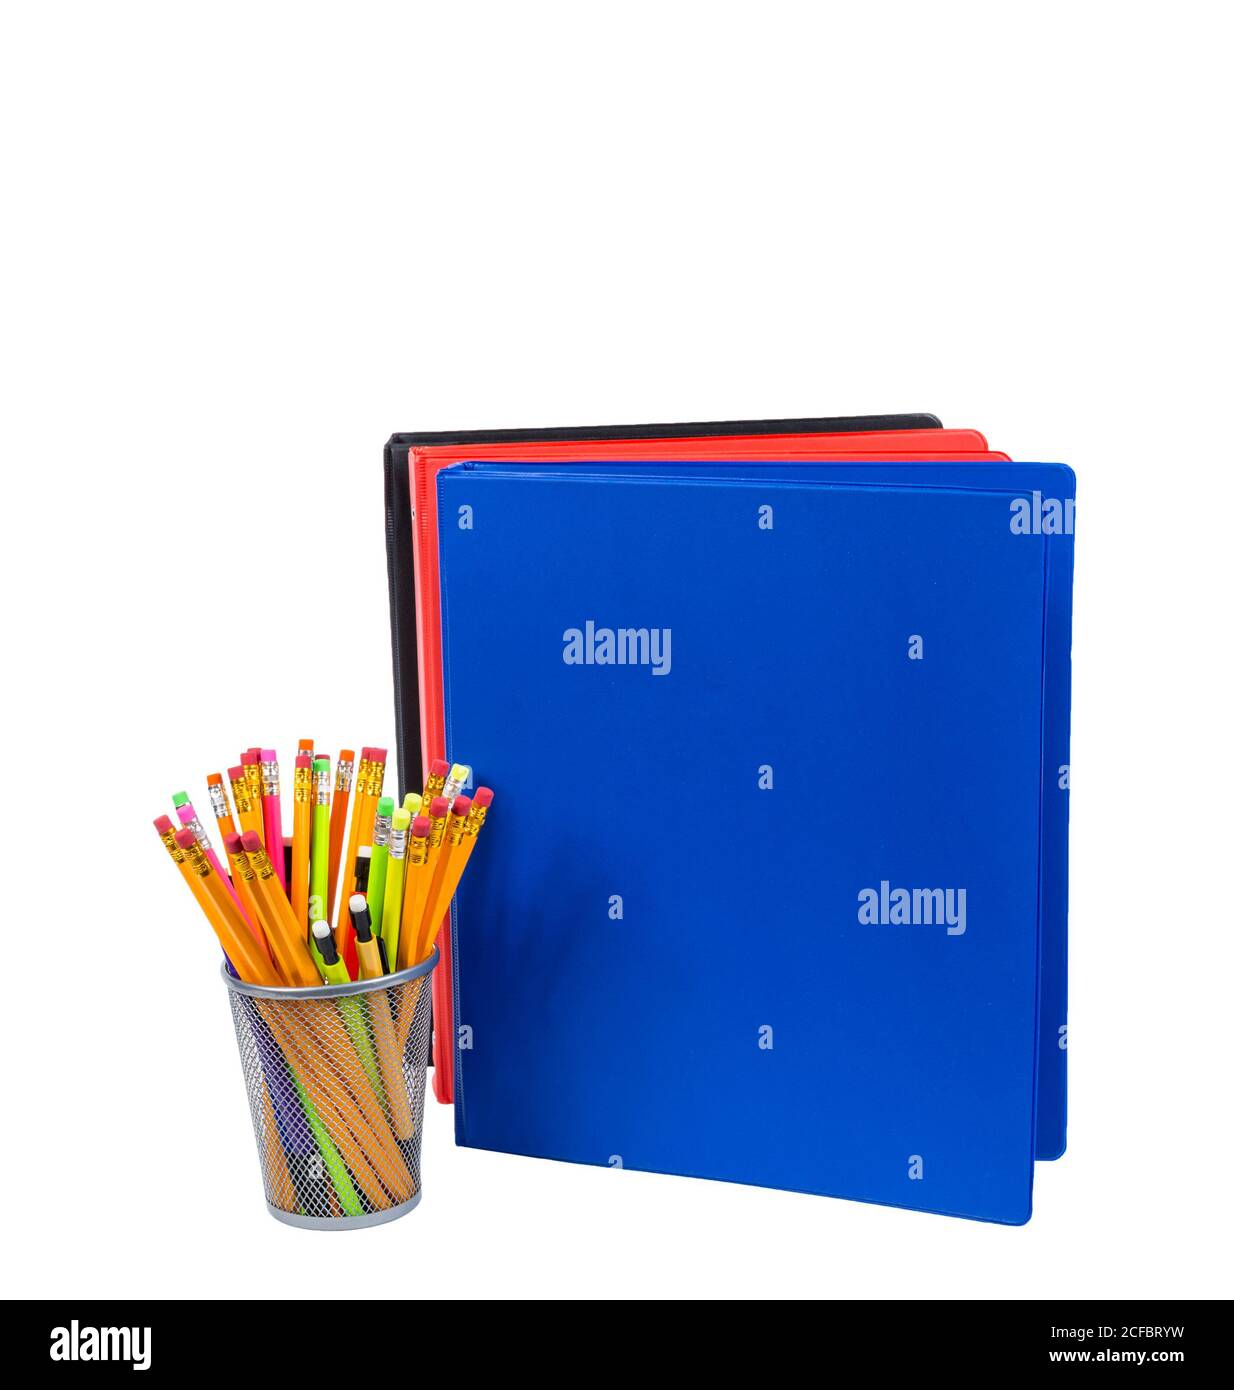 https://c8.alamy.com/comp/2CFBRYW/photograph-of-colorful-pencils-in-pencil-holder-and-stack-of-brightly-colored-notebooks-with-copy-space-isolated-on-a-white-background-2CFBRYW.jpg